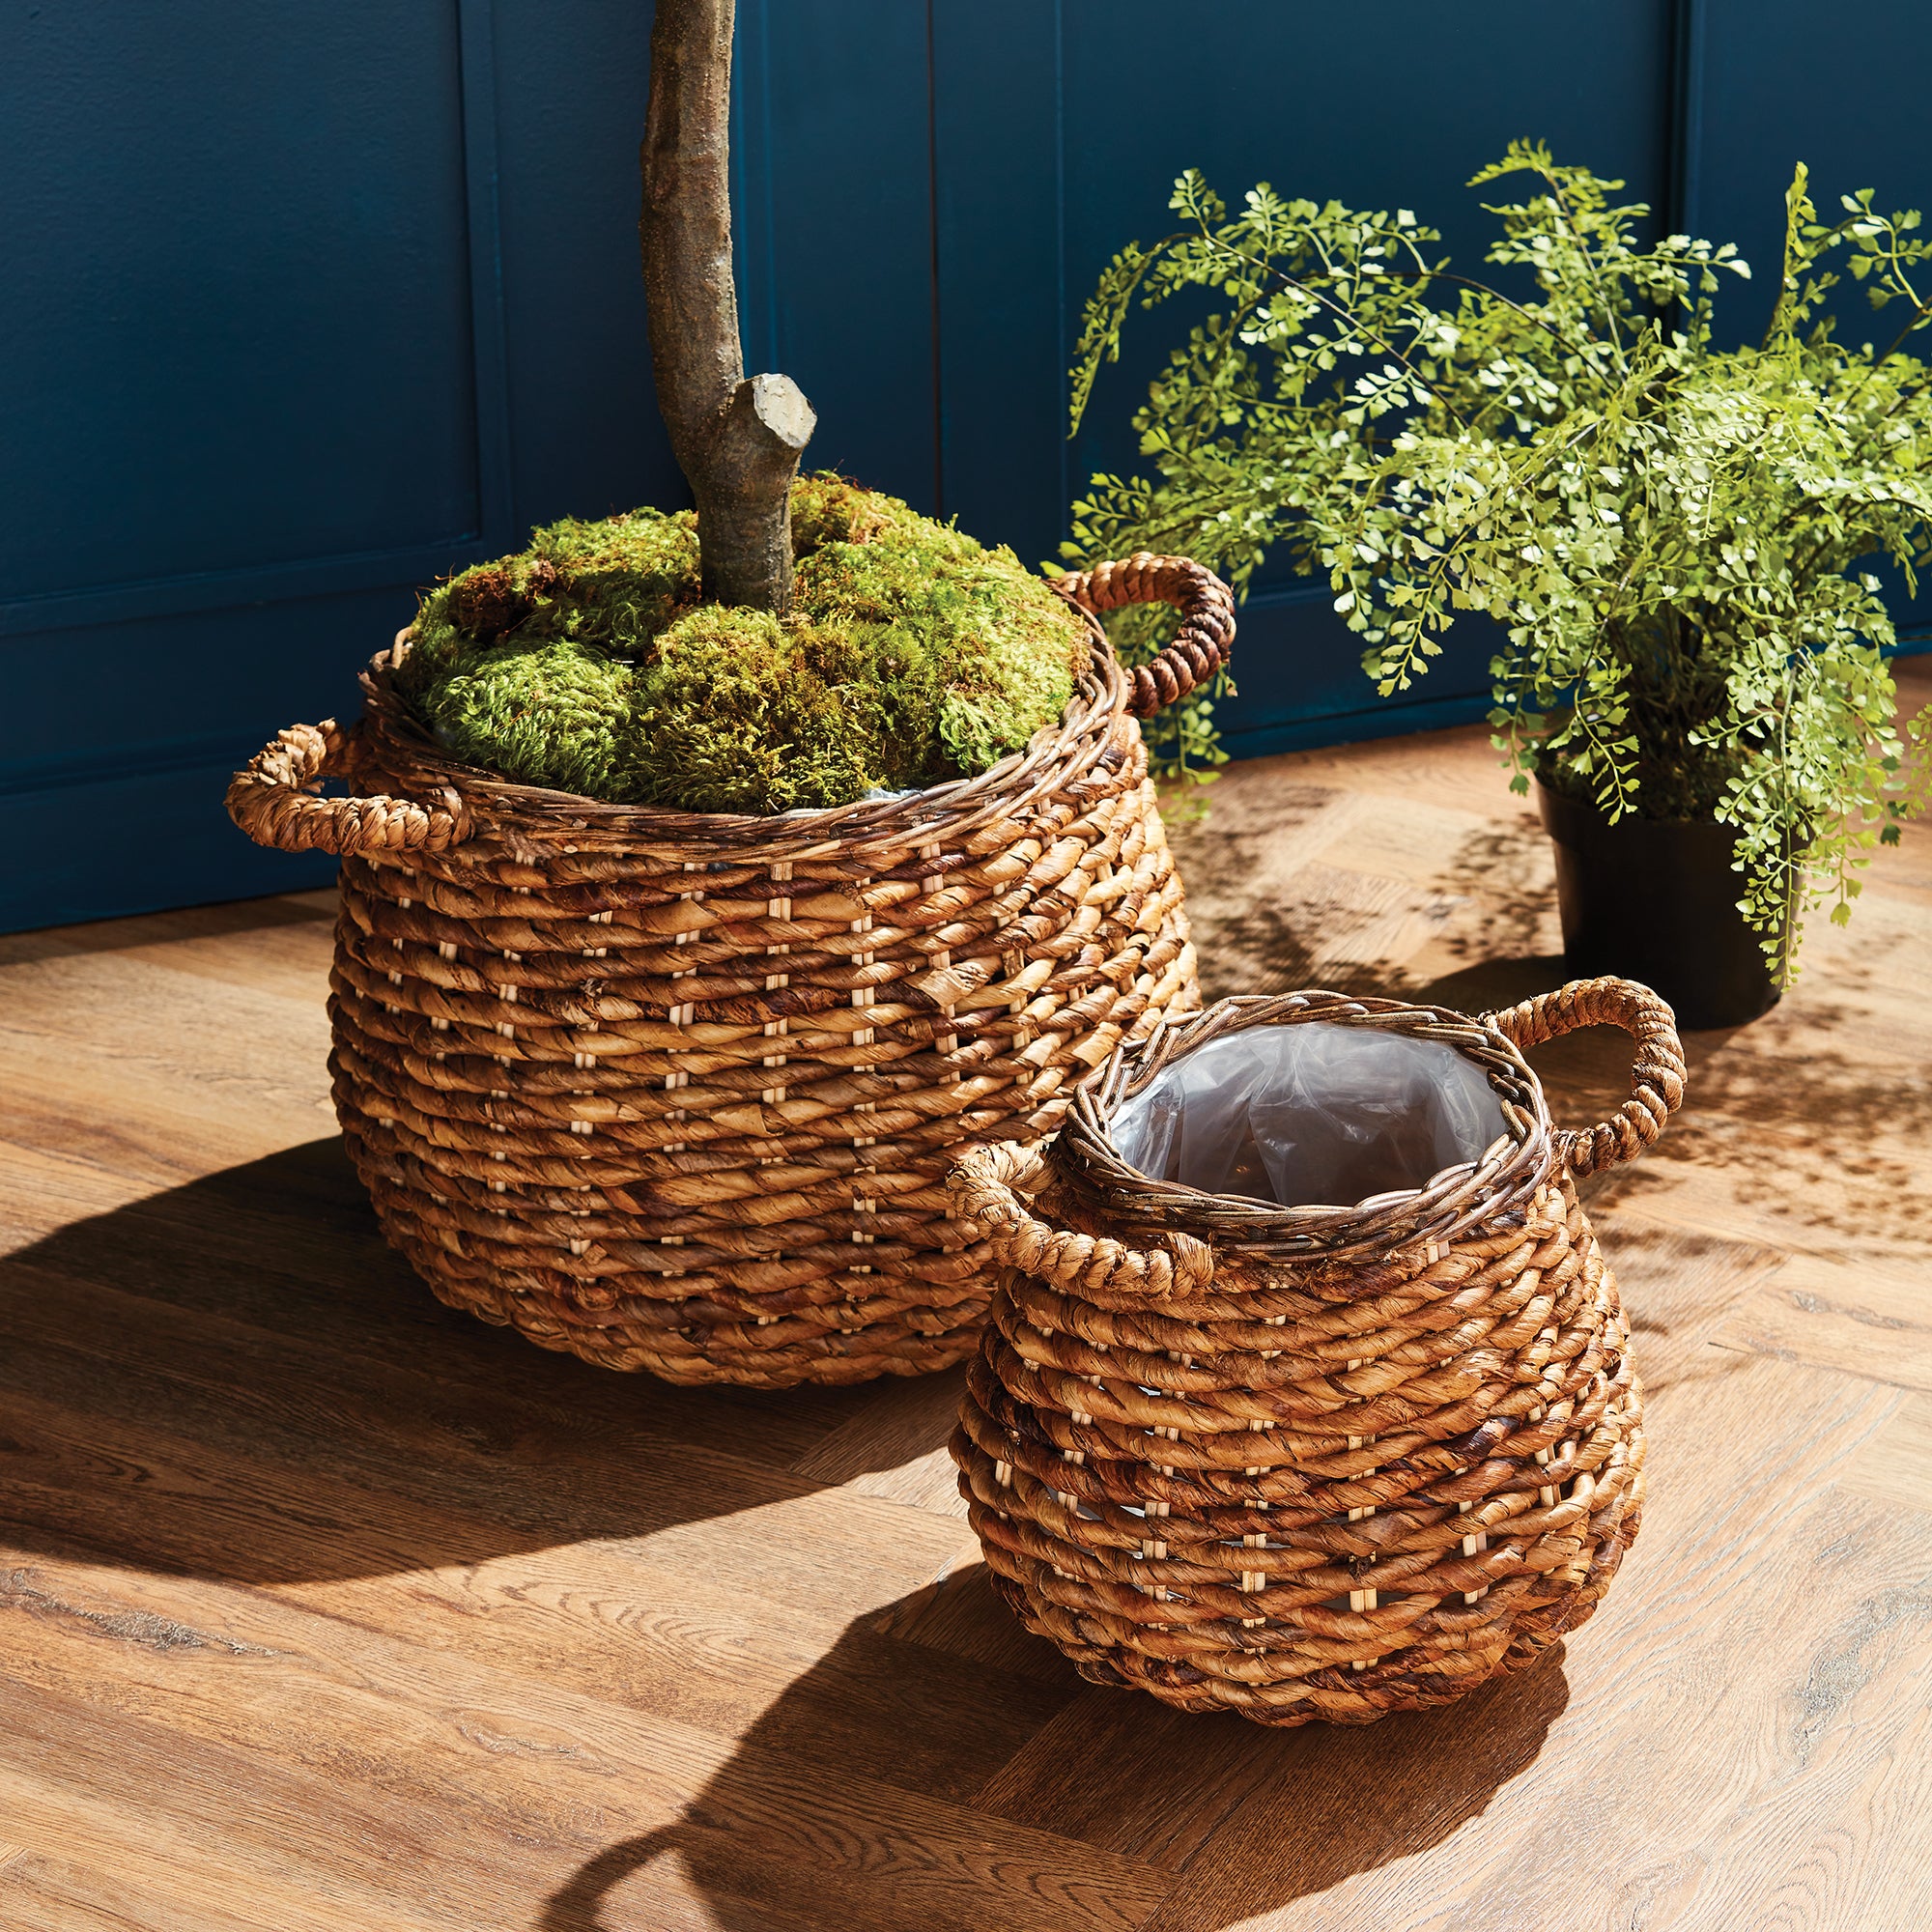 A natural leaf fiber, abaca is an upcycled, sustainable material. A very durable fiber, these natural baskets are lined with plastic and great for planting. Amethyst Home provides interior design, new construction, custom furniture, and area rugs in the Boston metro area.